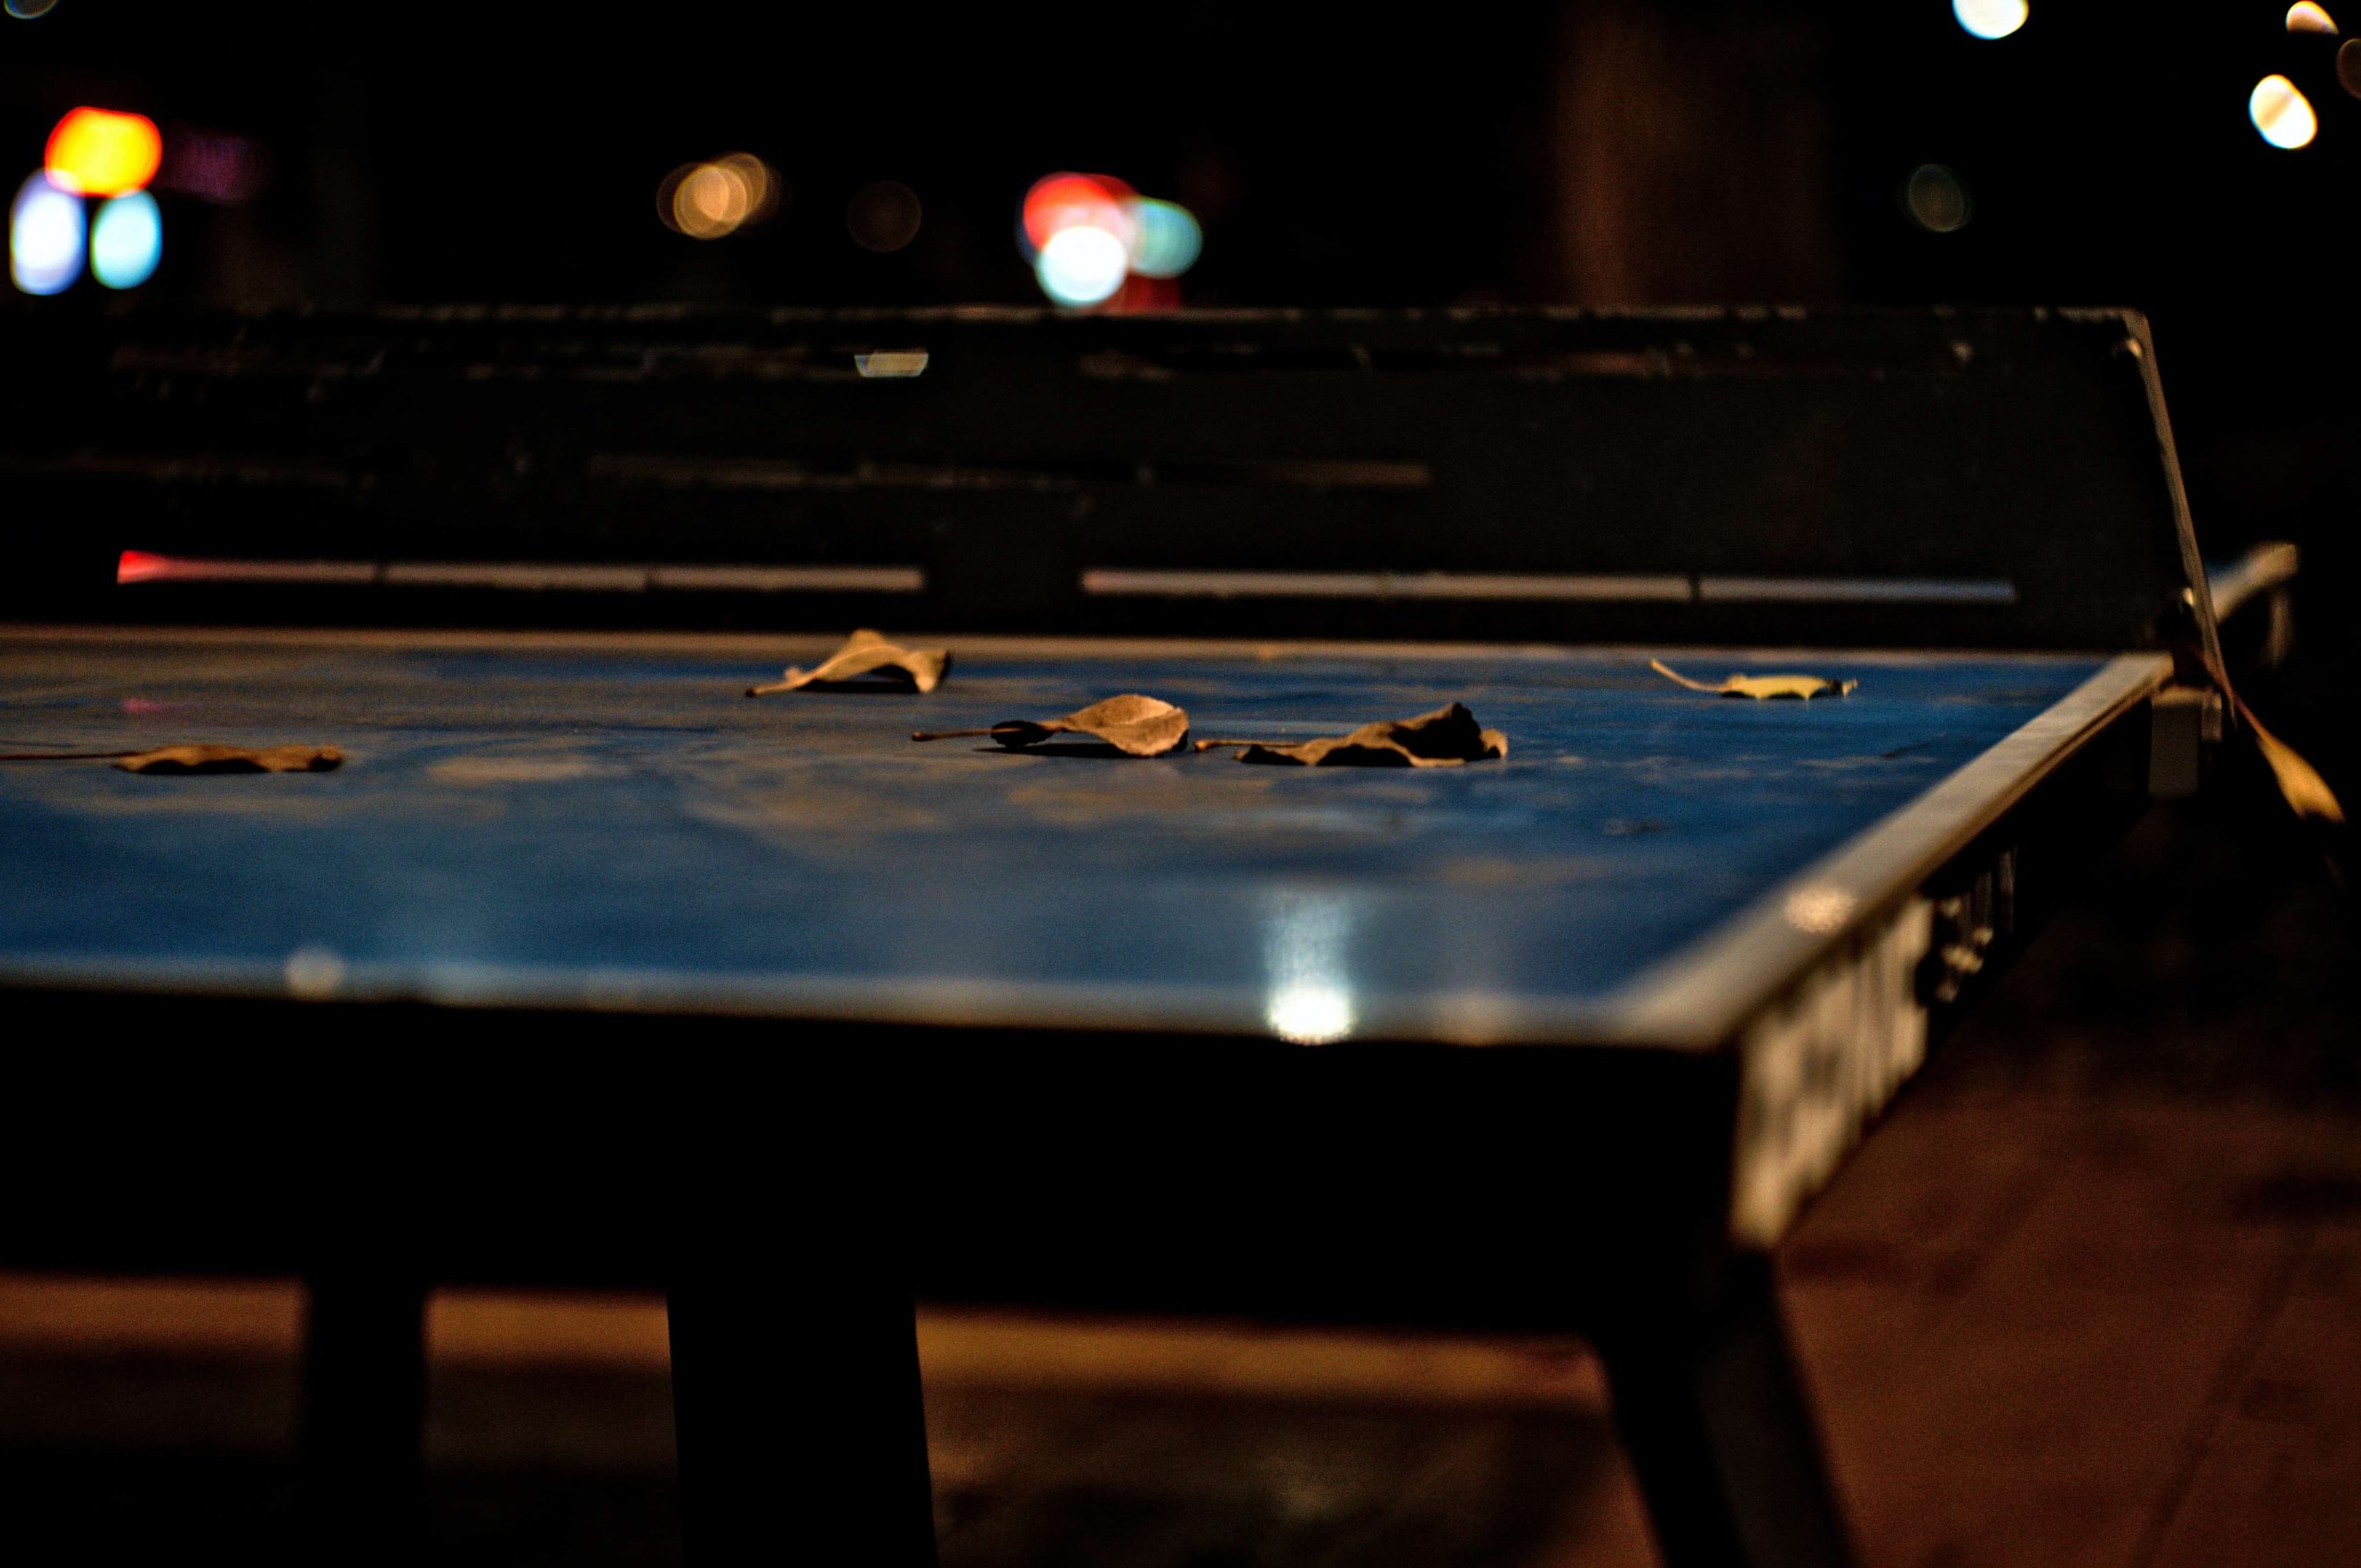 Best Pool Table Ping Pong Combo